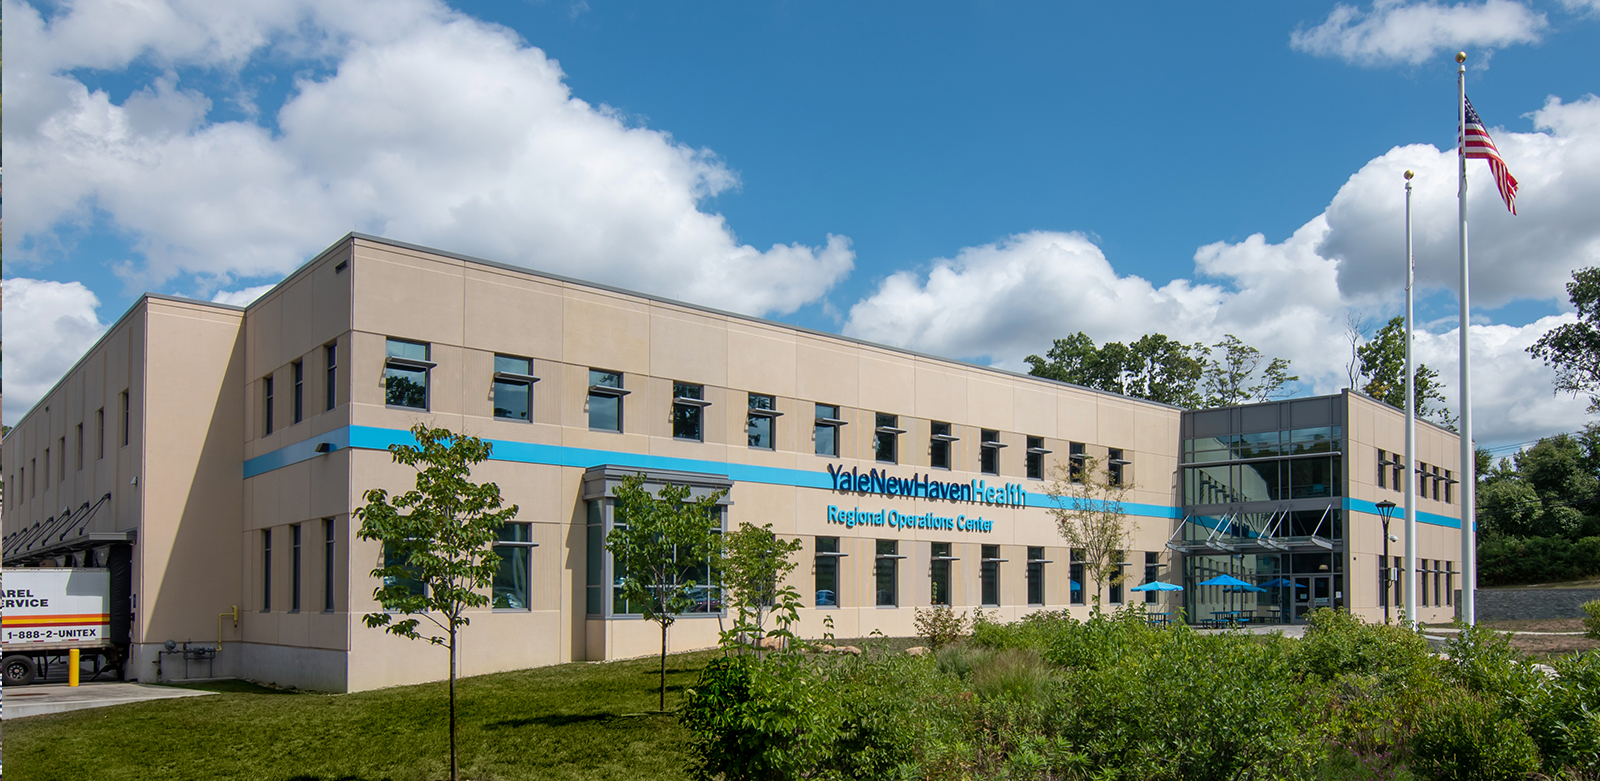 Yale New Haven Health, Regional Operations Center